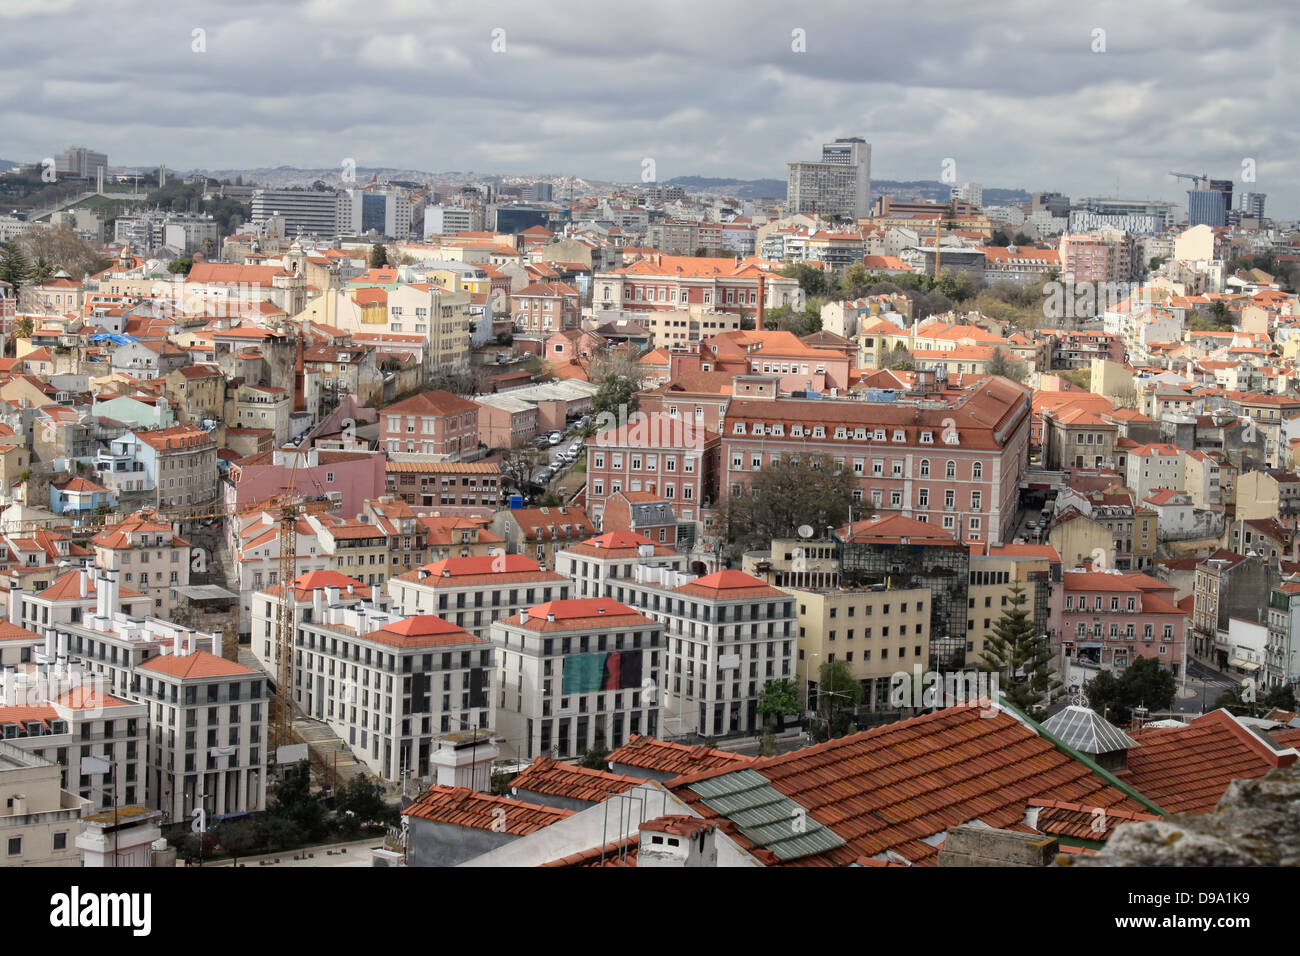 Cluster of buildings of Lisbon city, Portugal Stock Photo